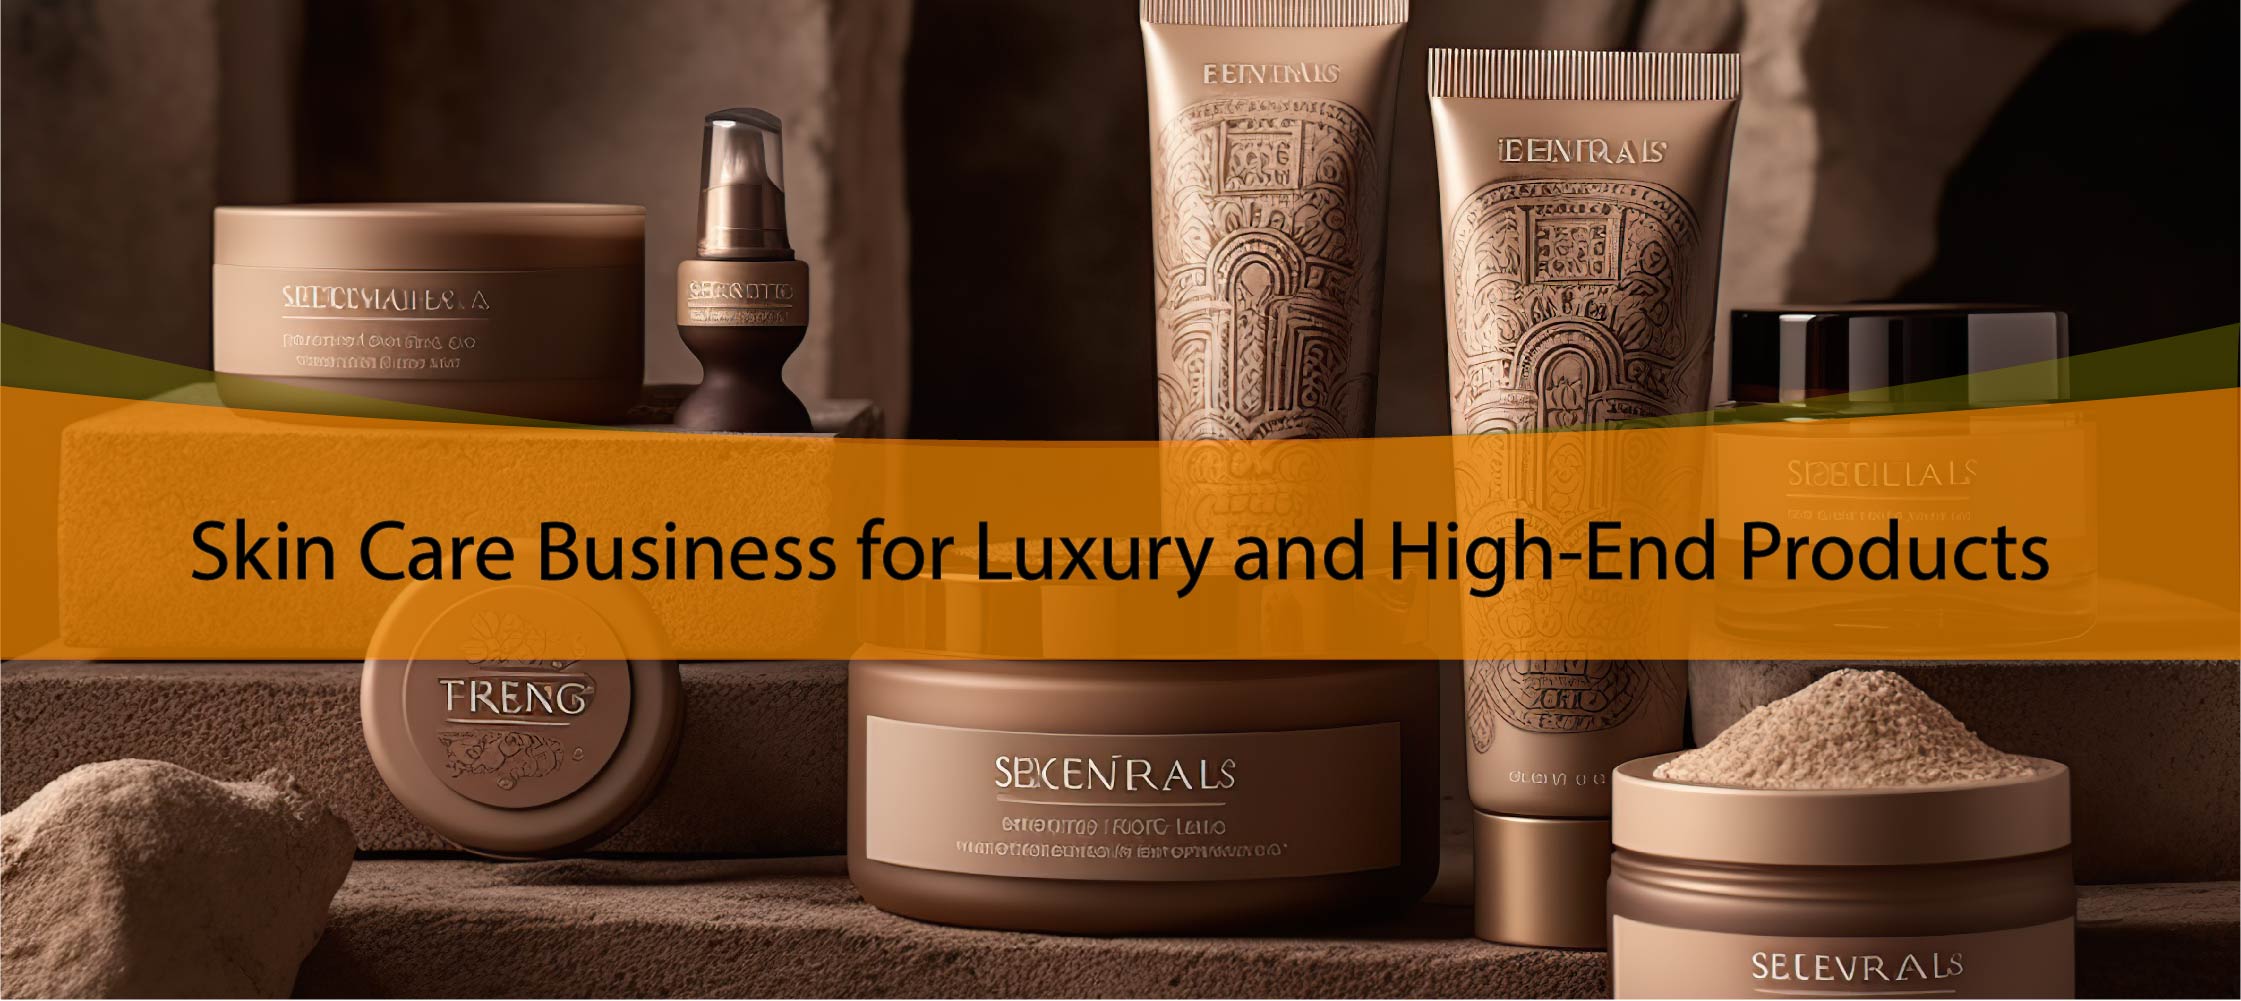 Skin Care Business for Luxury and High-End Products